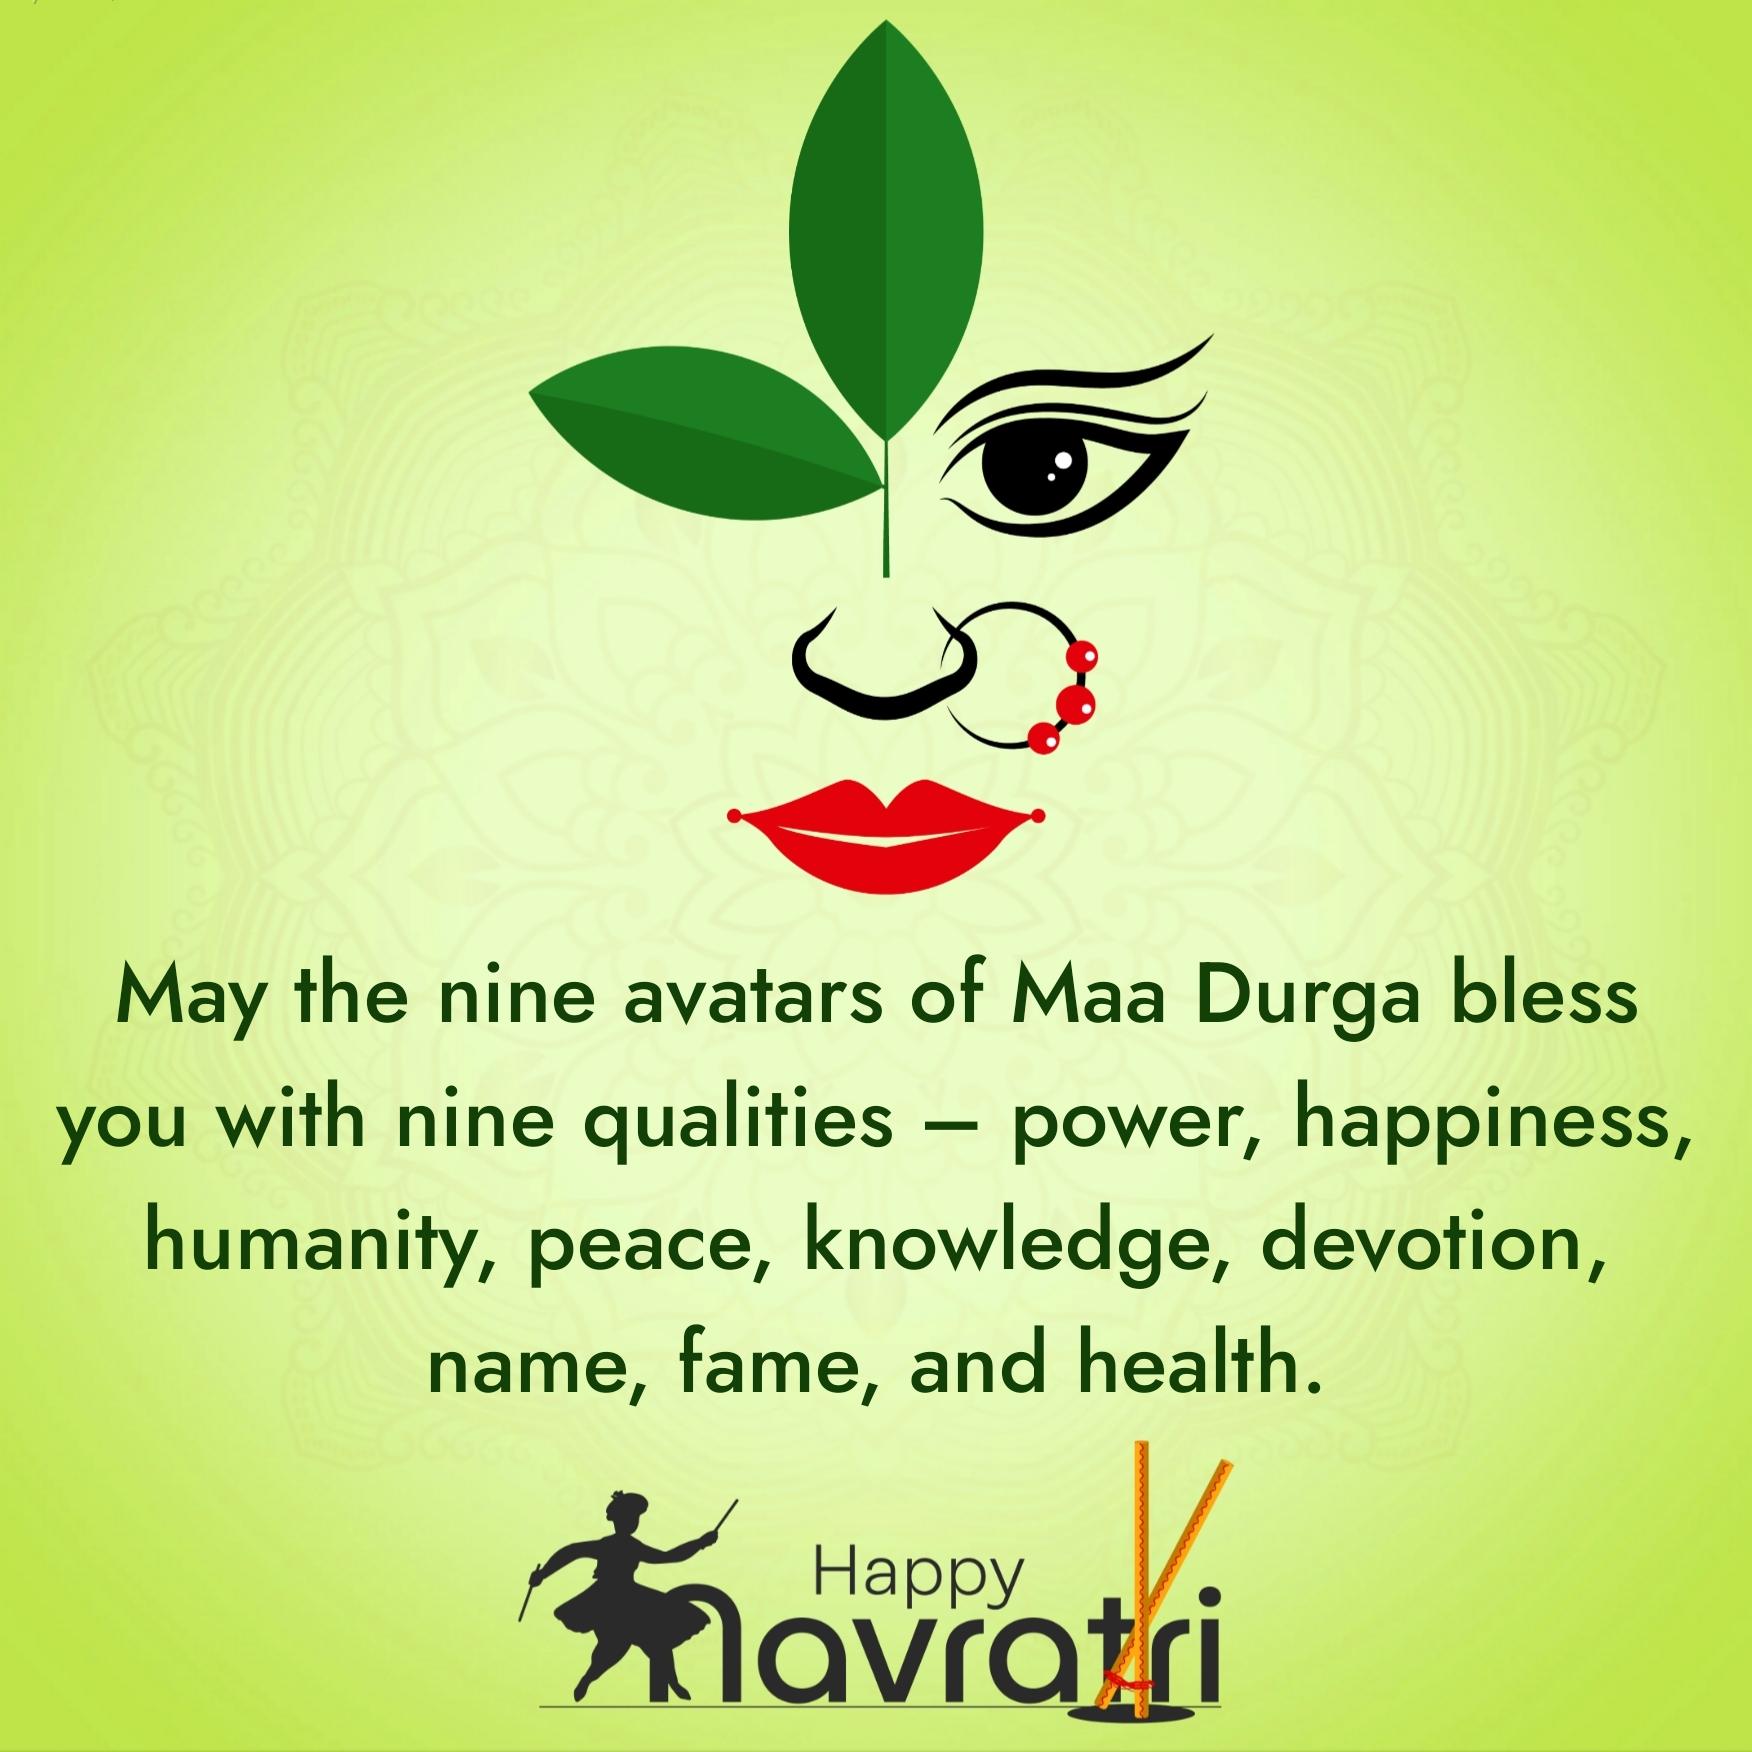 May the nine avatars of Maa Durga bless you with nine qualities